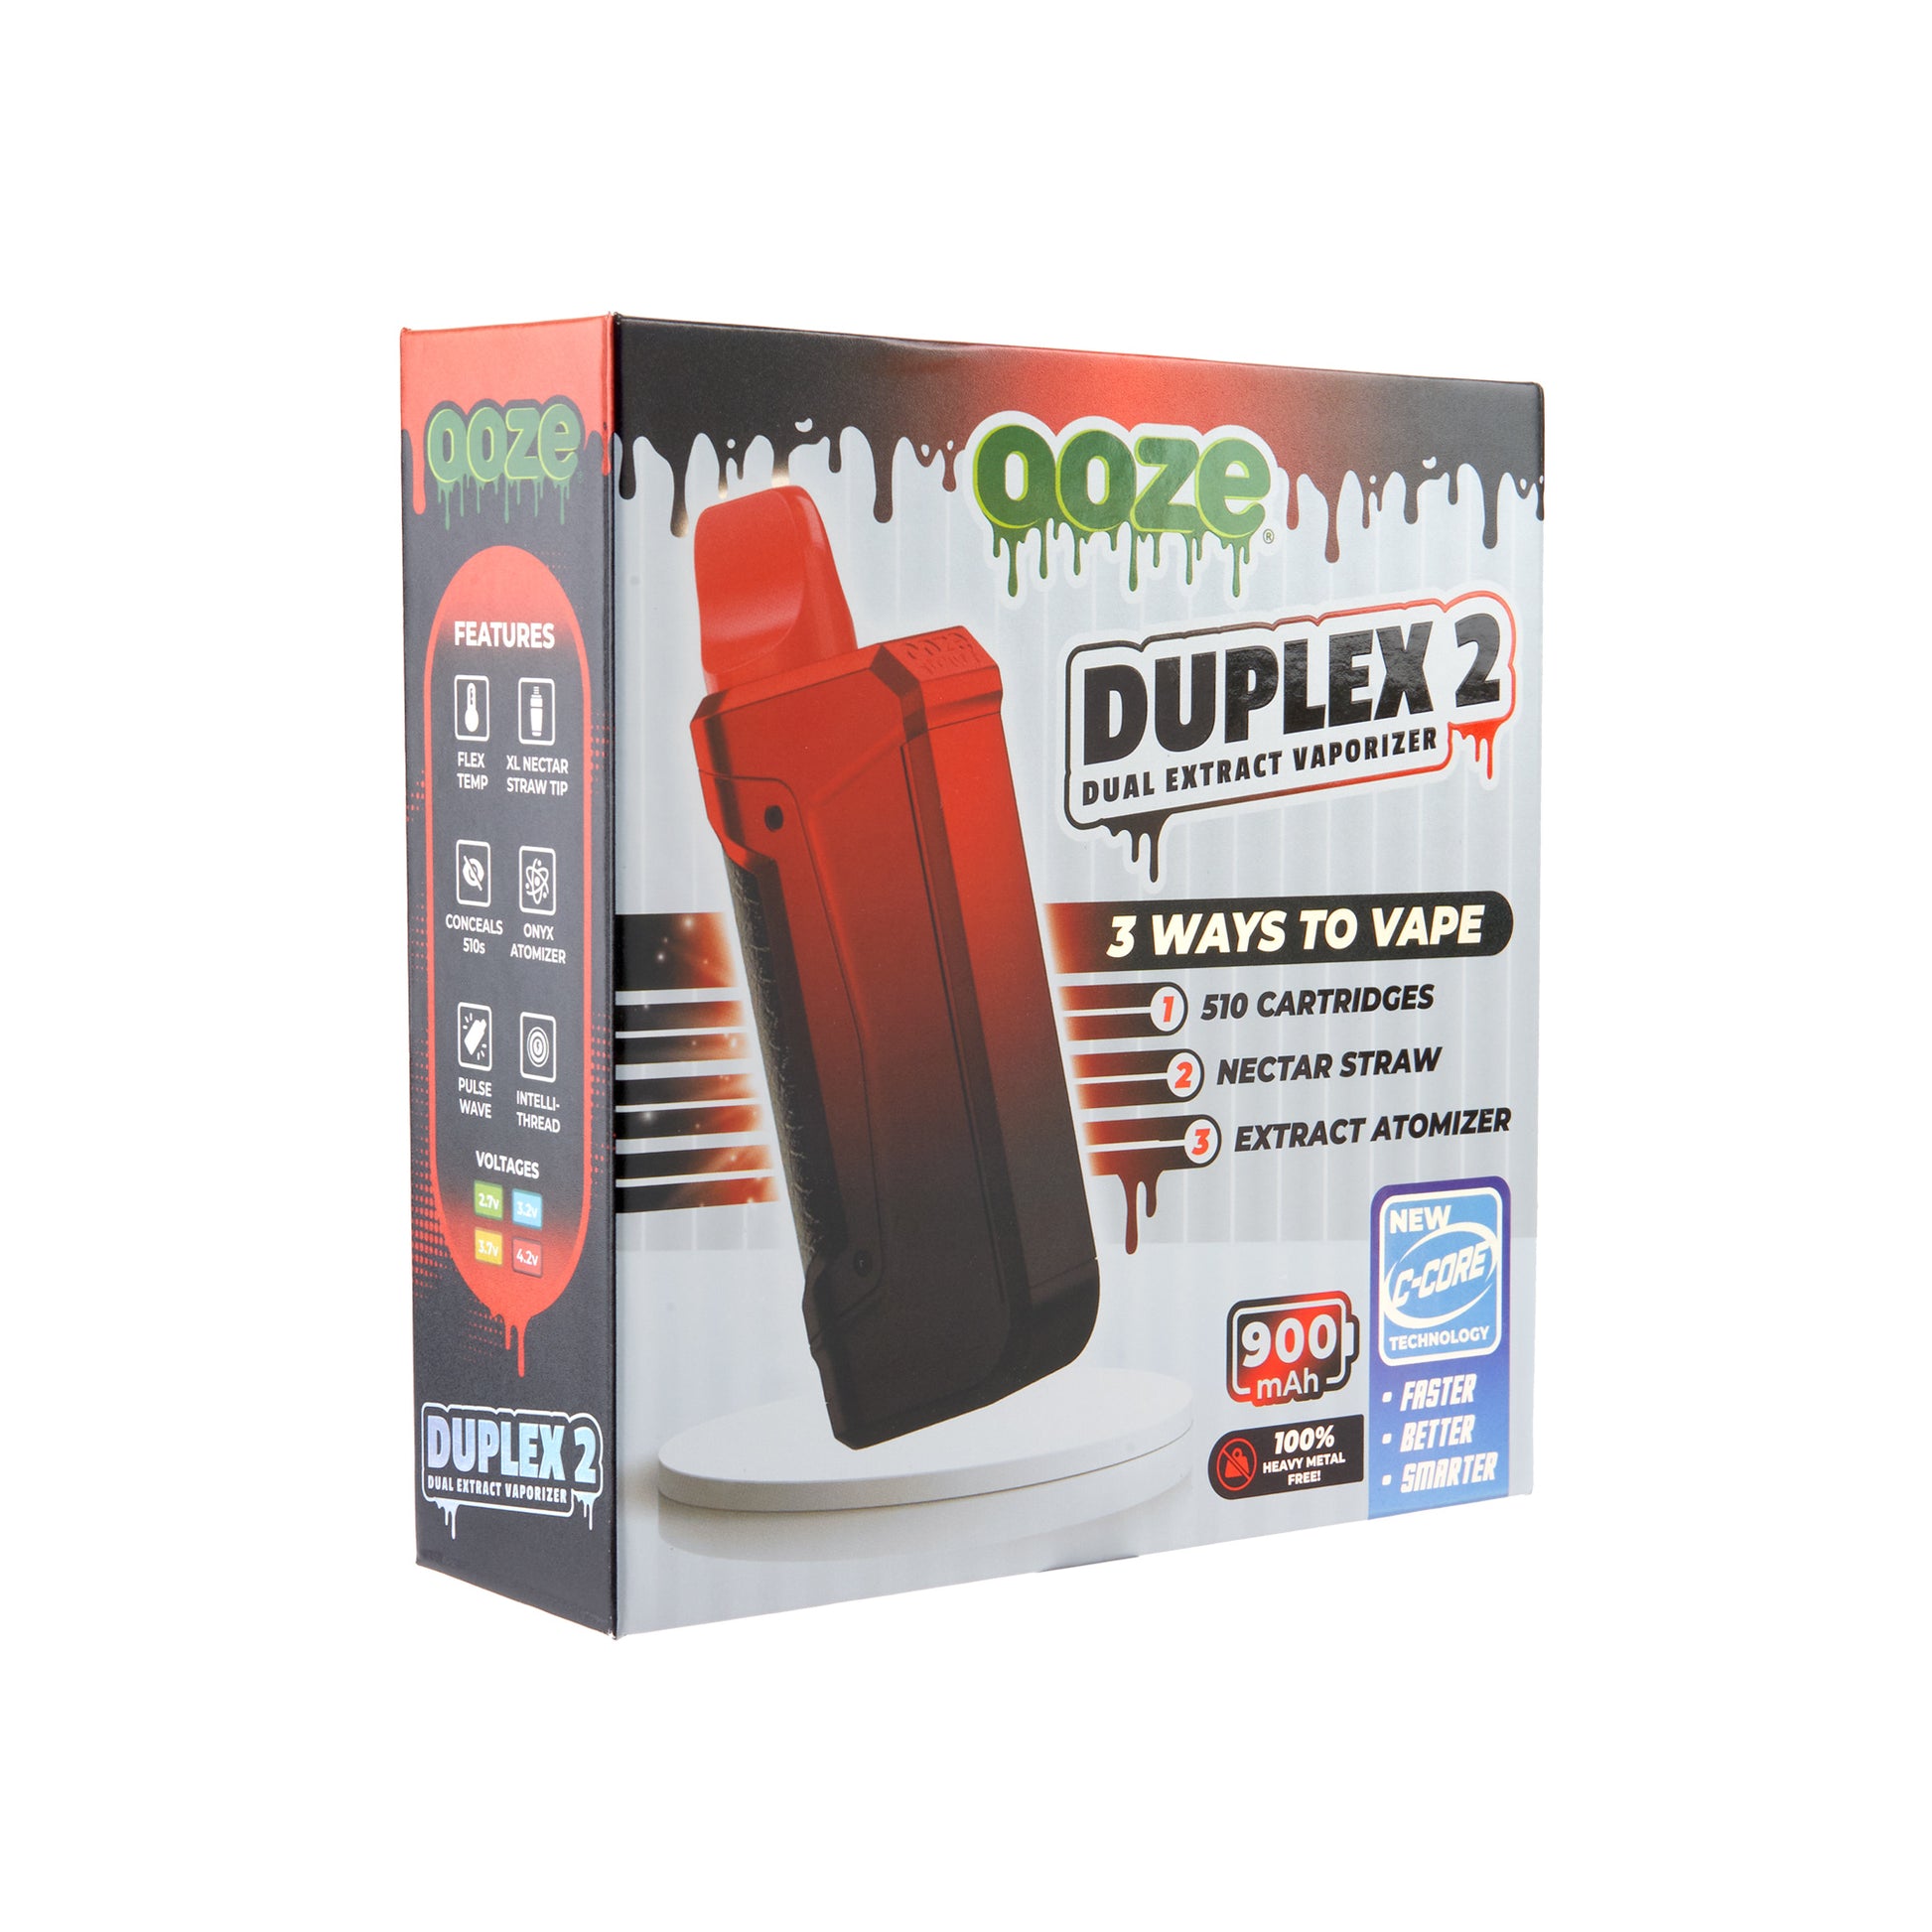 The box for The midnight sun Ooze Duplex 2 extract vaporizer